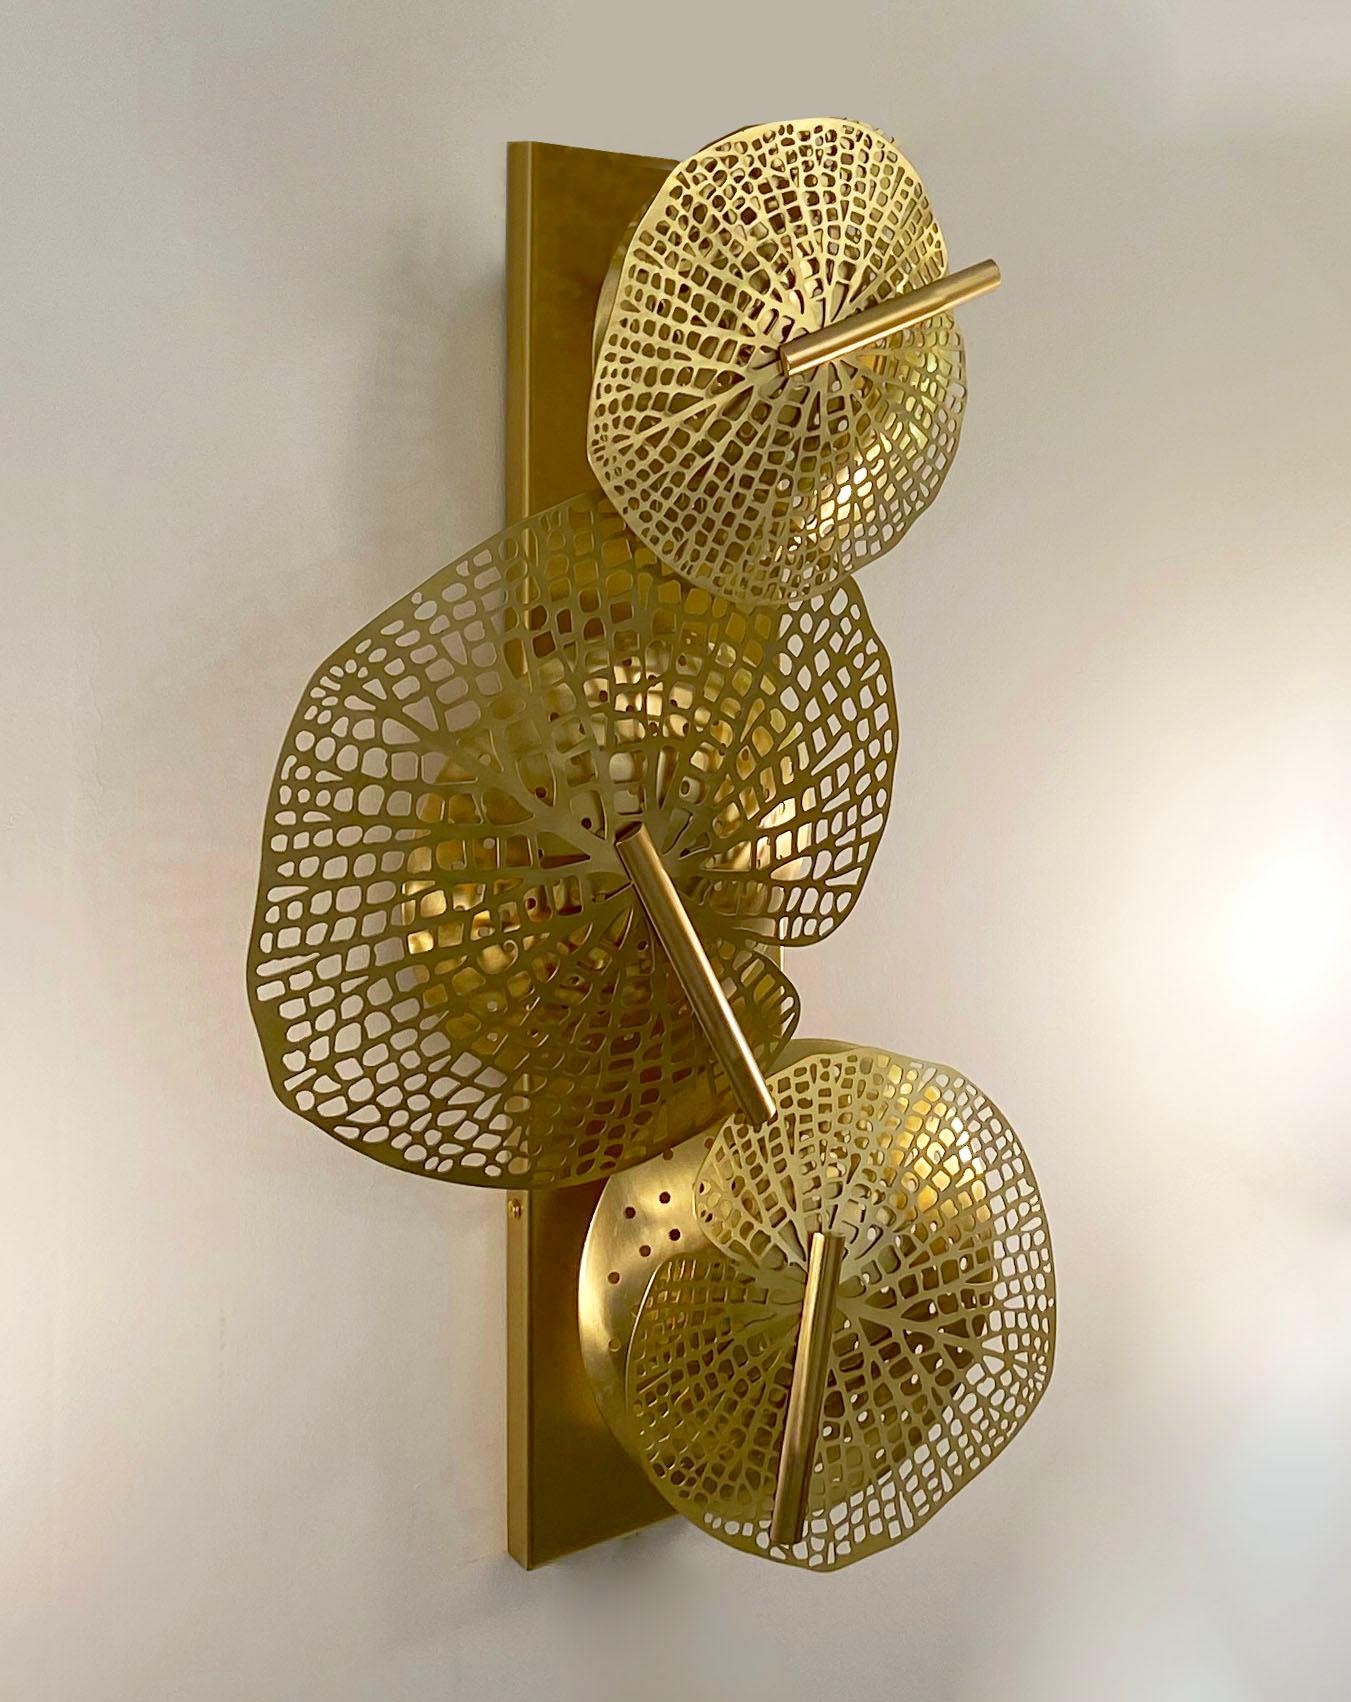 Metal Contemporary Bespoke Organic Italian Art Design Perforated Brass Leaf Sconce For Sale